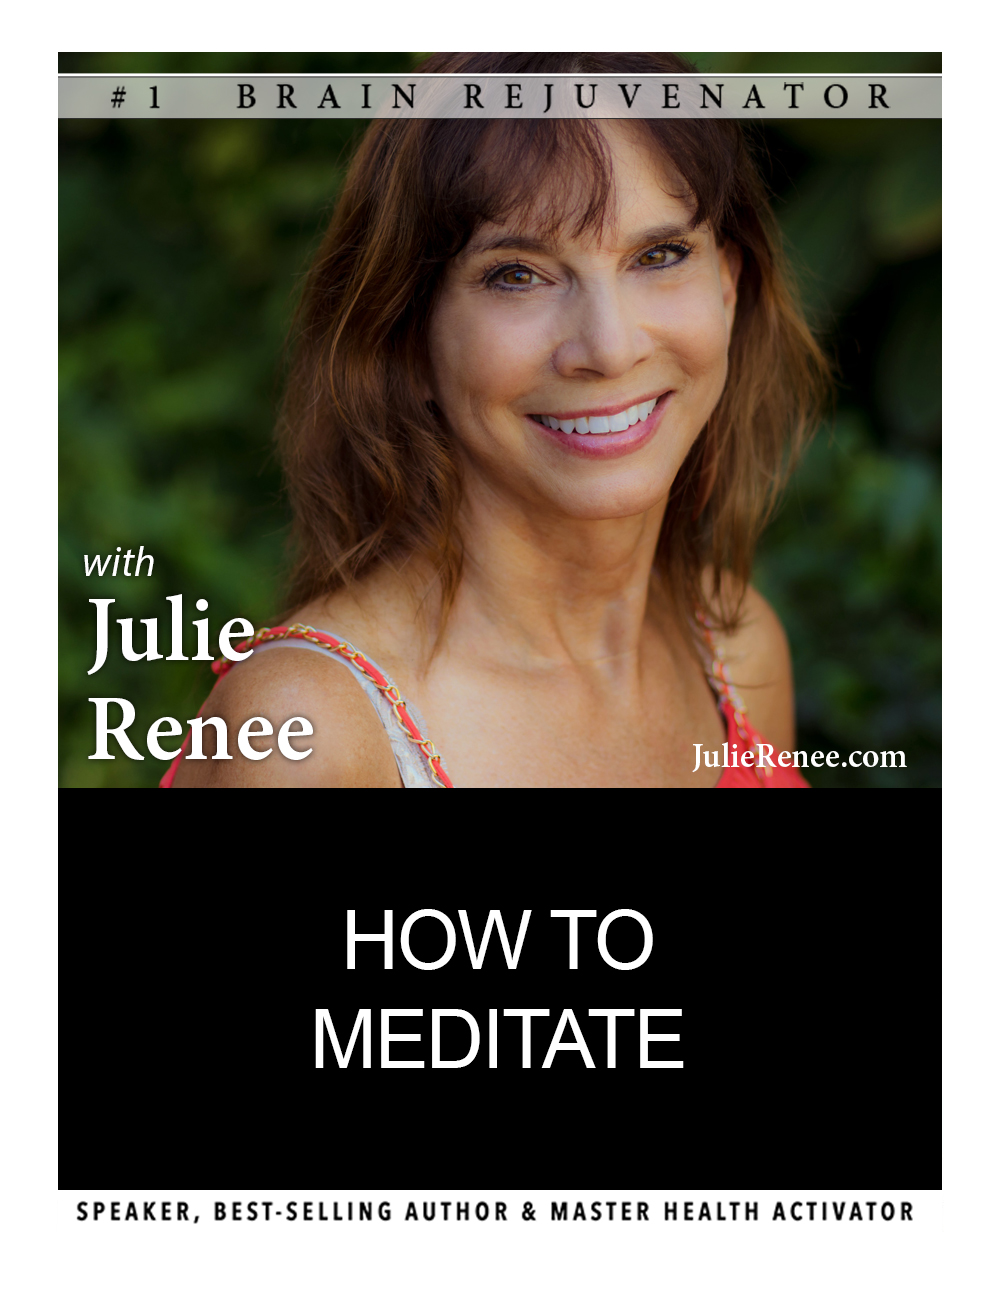 The Definitive Guide to Meditation